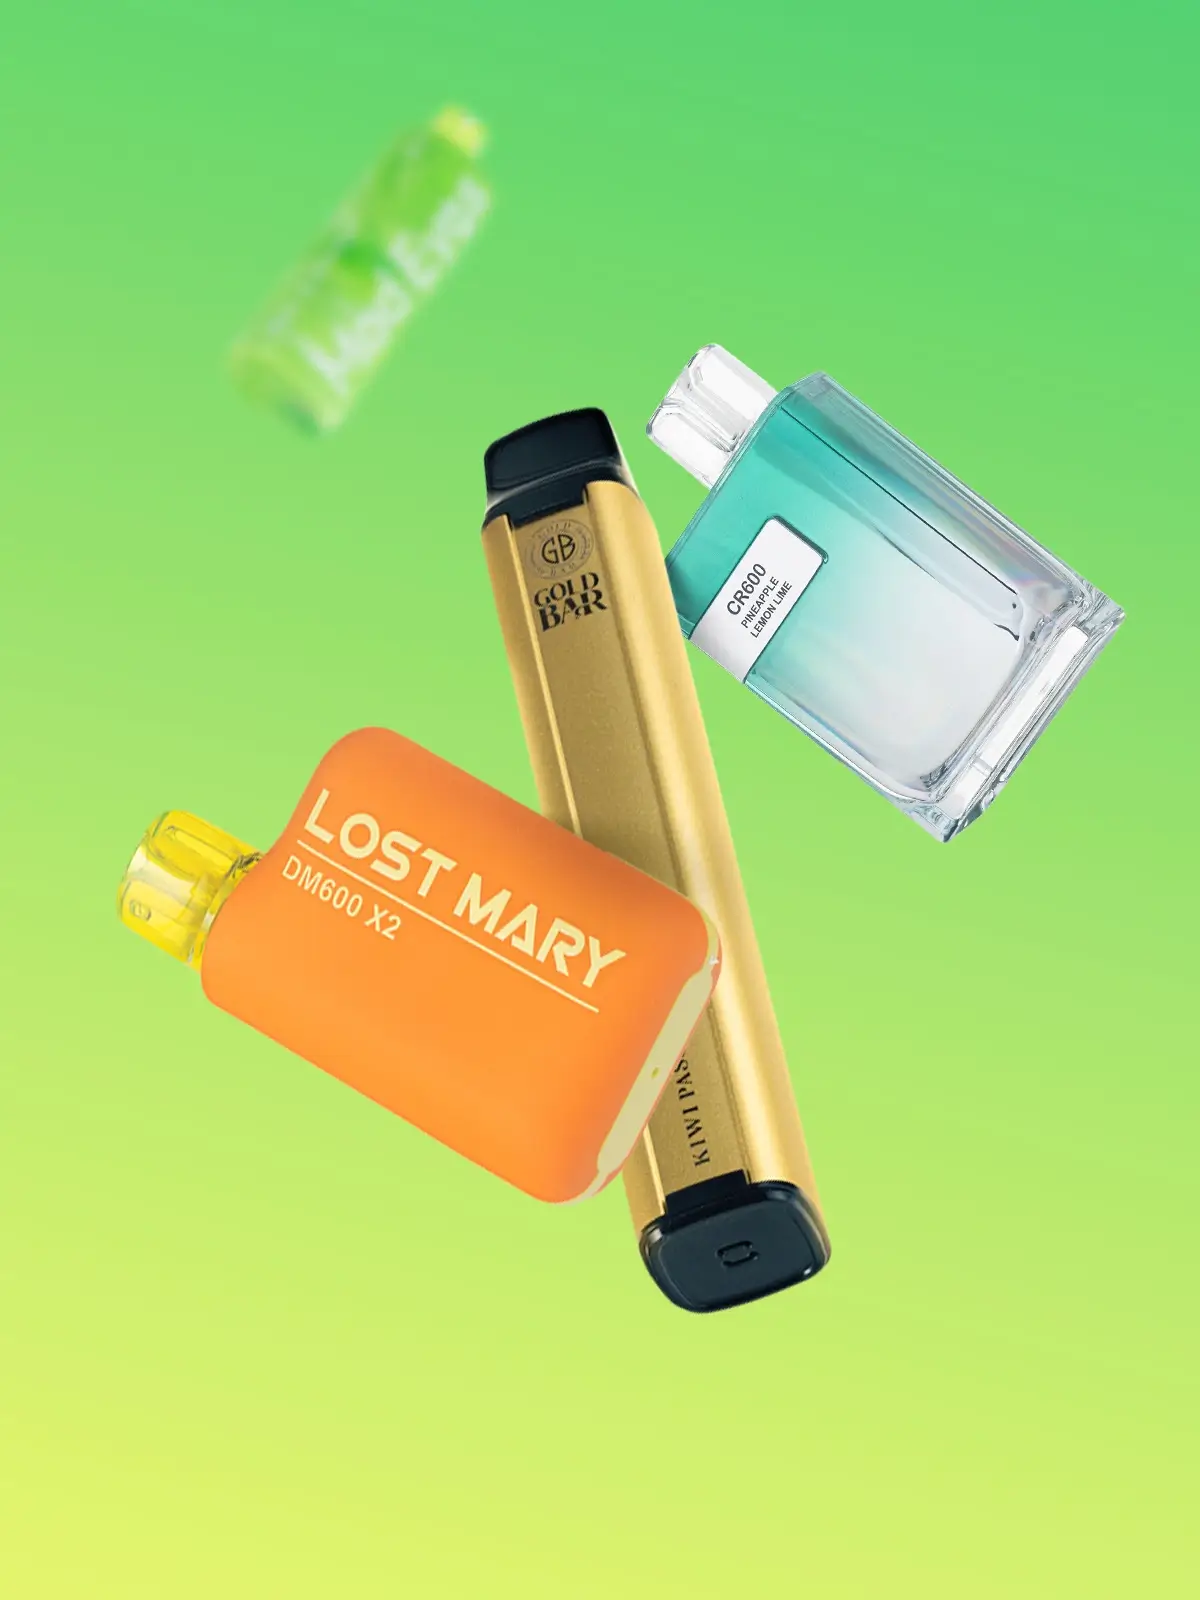 A collection of disposable vapes including Lost Mary and Gold Bar floating in front of a green/yellow background